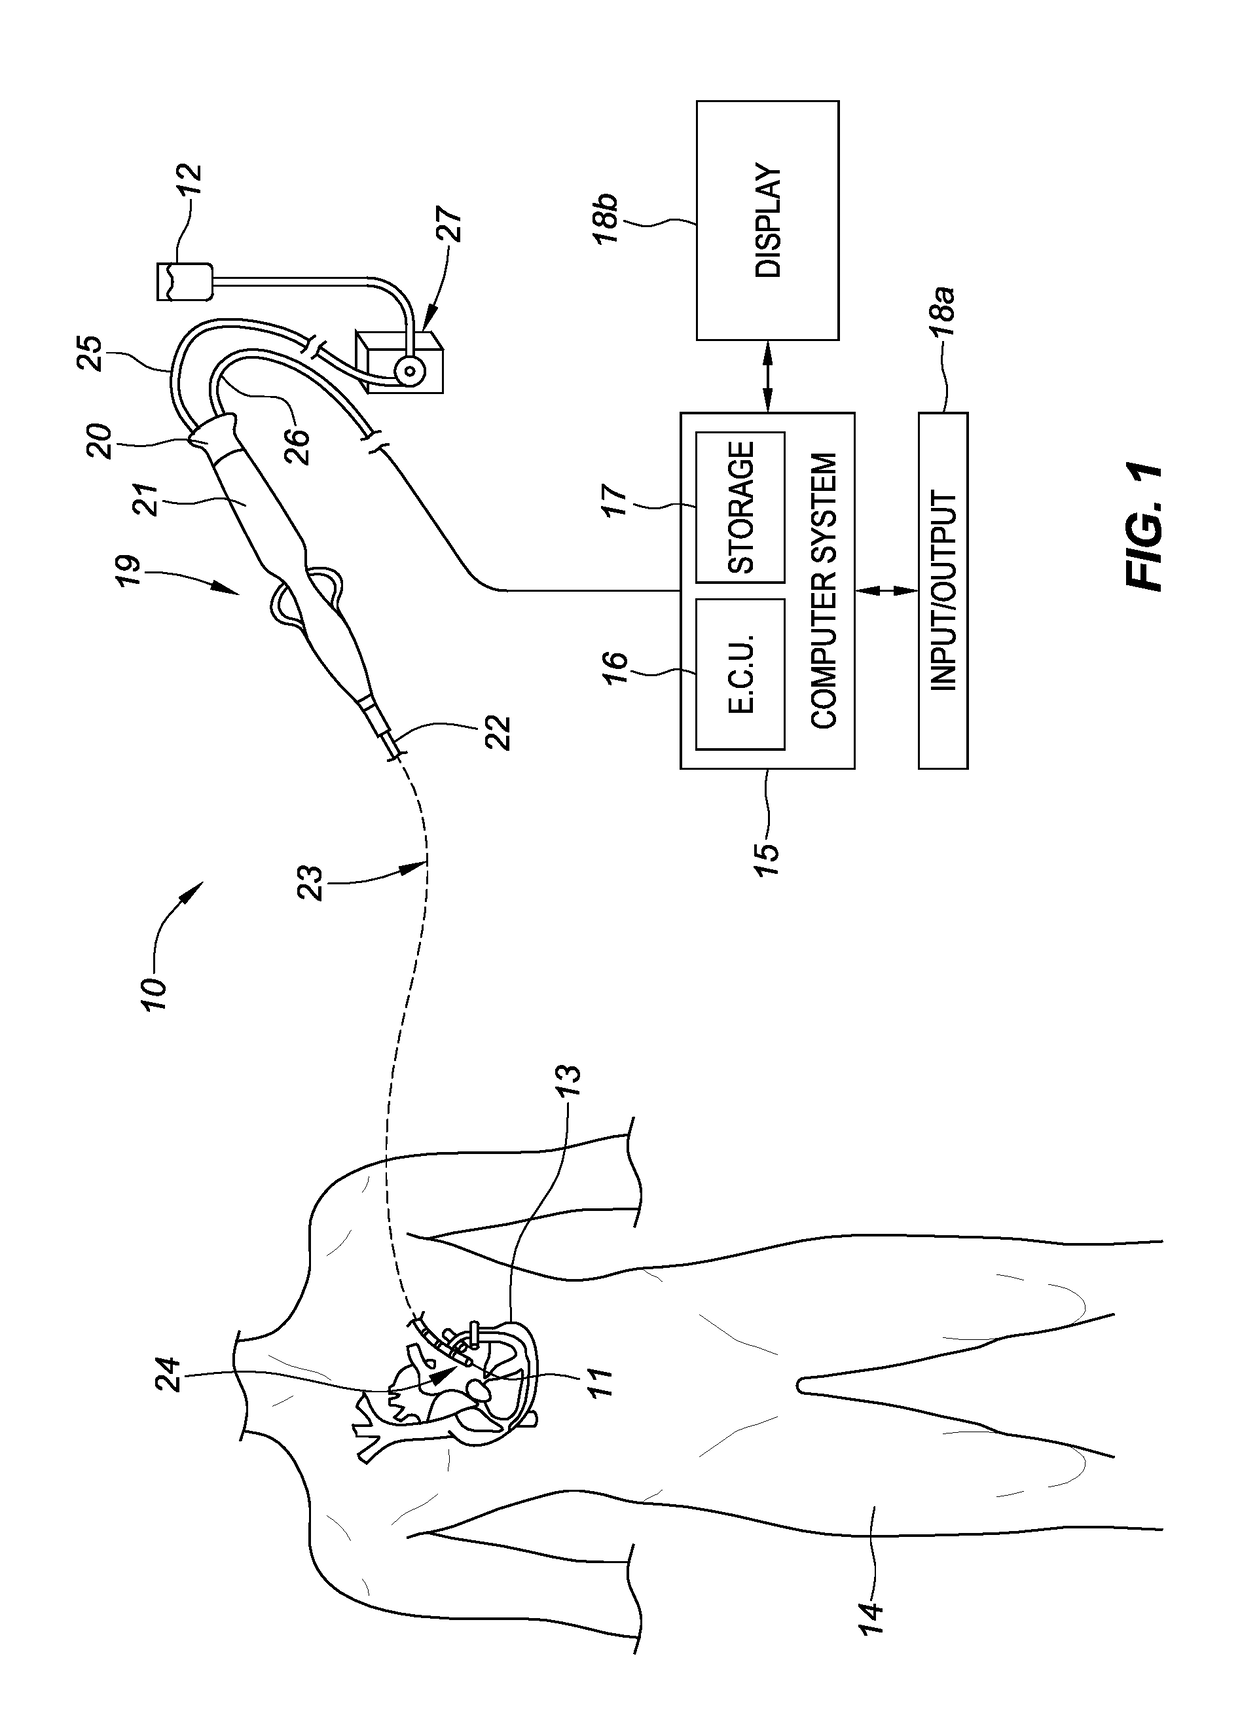 Medical device with multi-core fiber for optical sensing